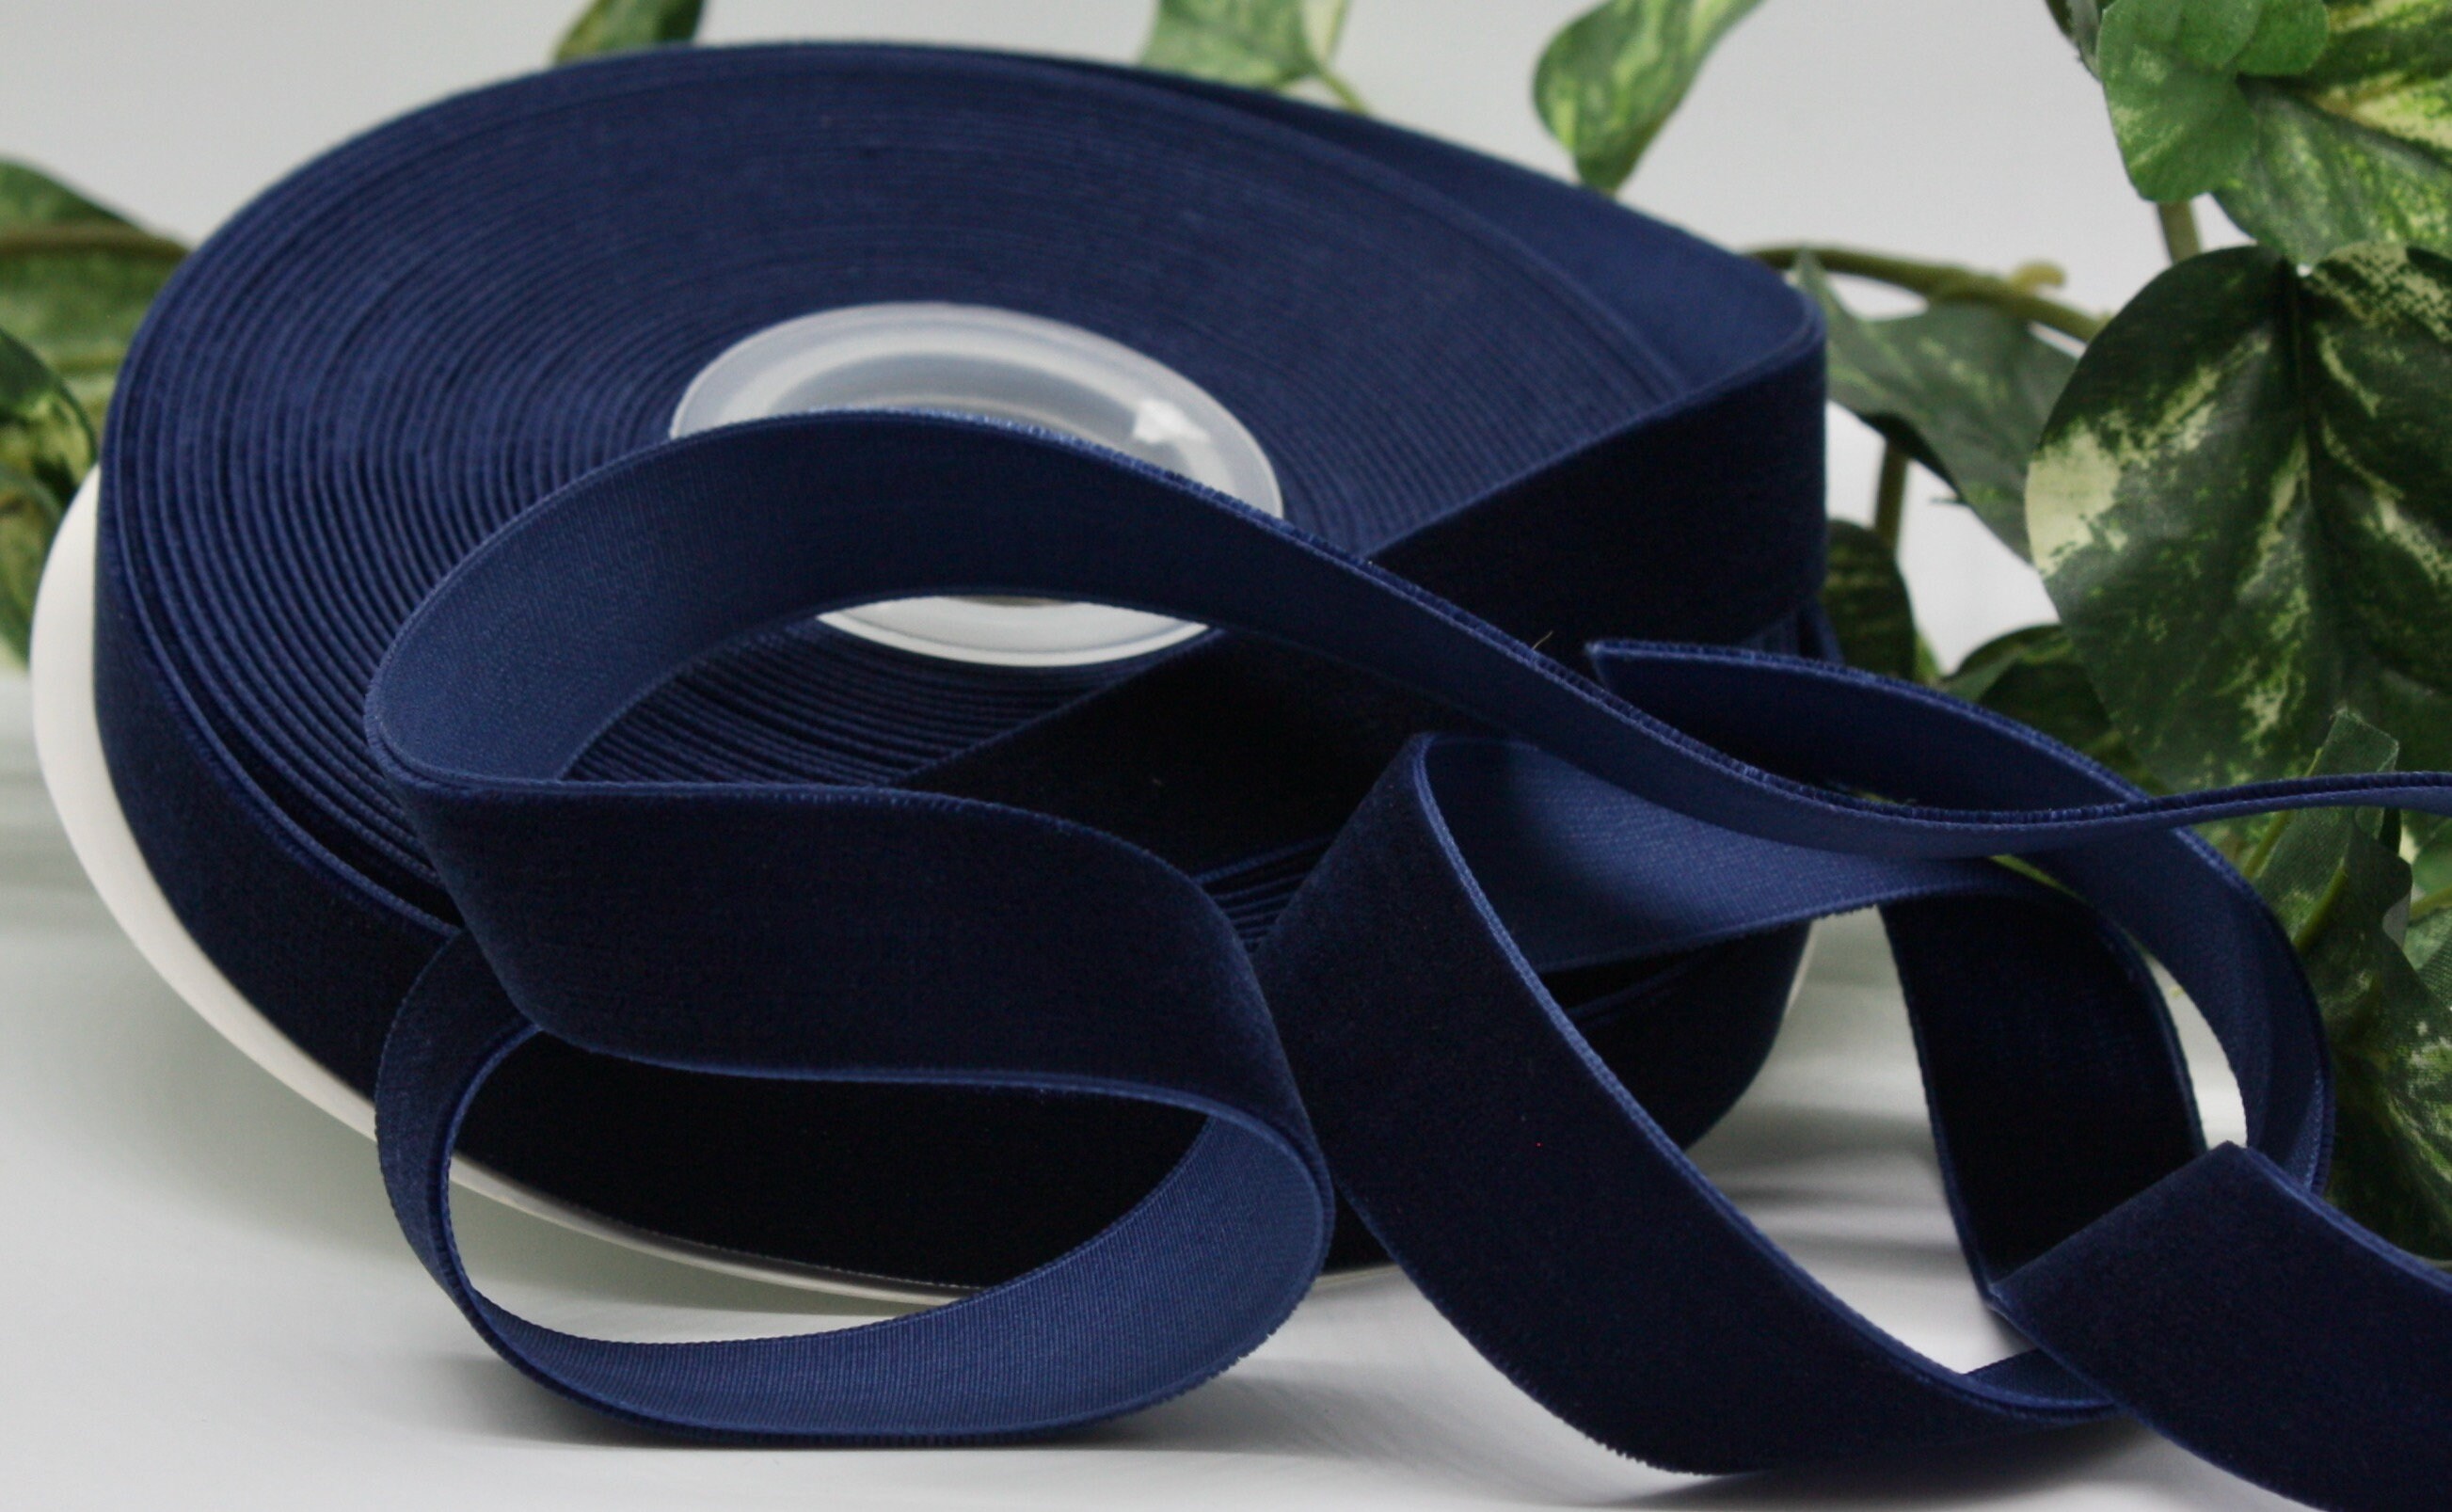 2 Yards Navy Silk Ribbon 1/8 Wide Ribbon Weddings, Invitations, Gift Wrap,  Trim, Scrapbooking, Party Supplies by the Yard 